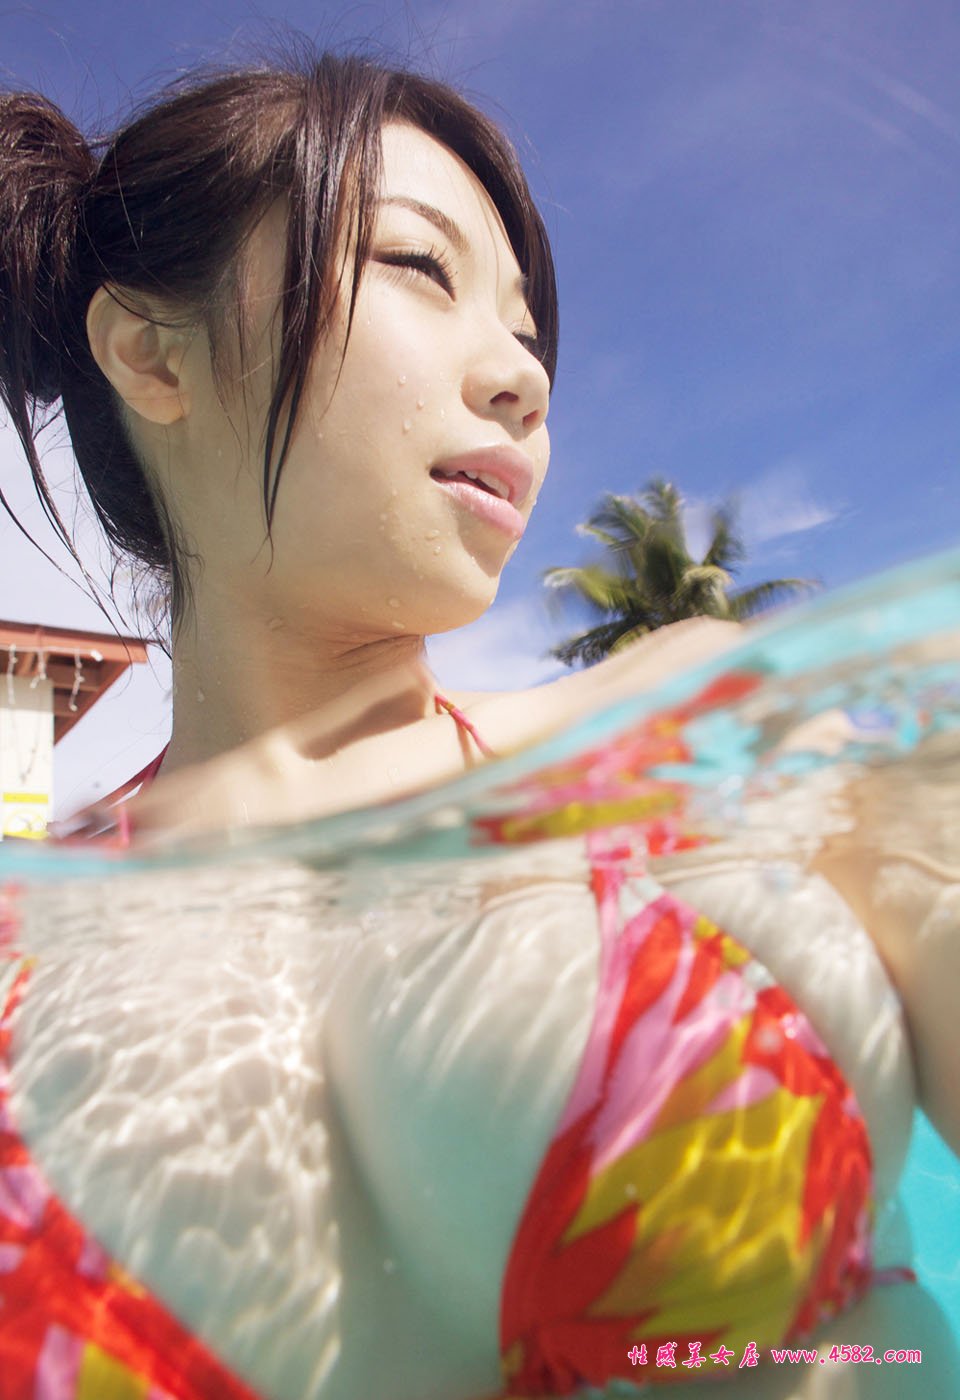 Pretty Chinese Lady In Swimming Pool With XL Big